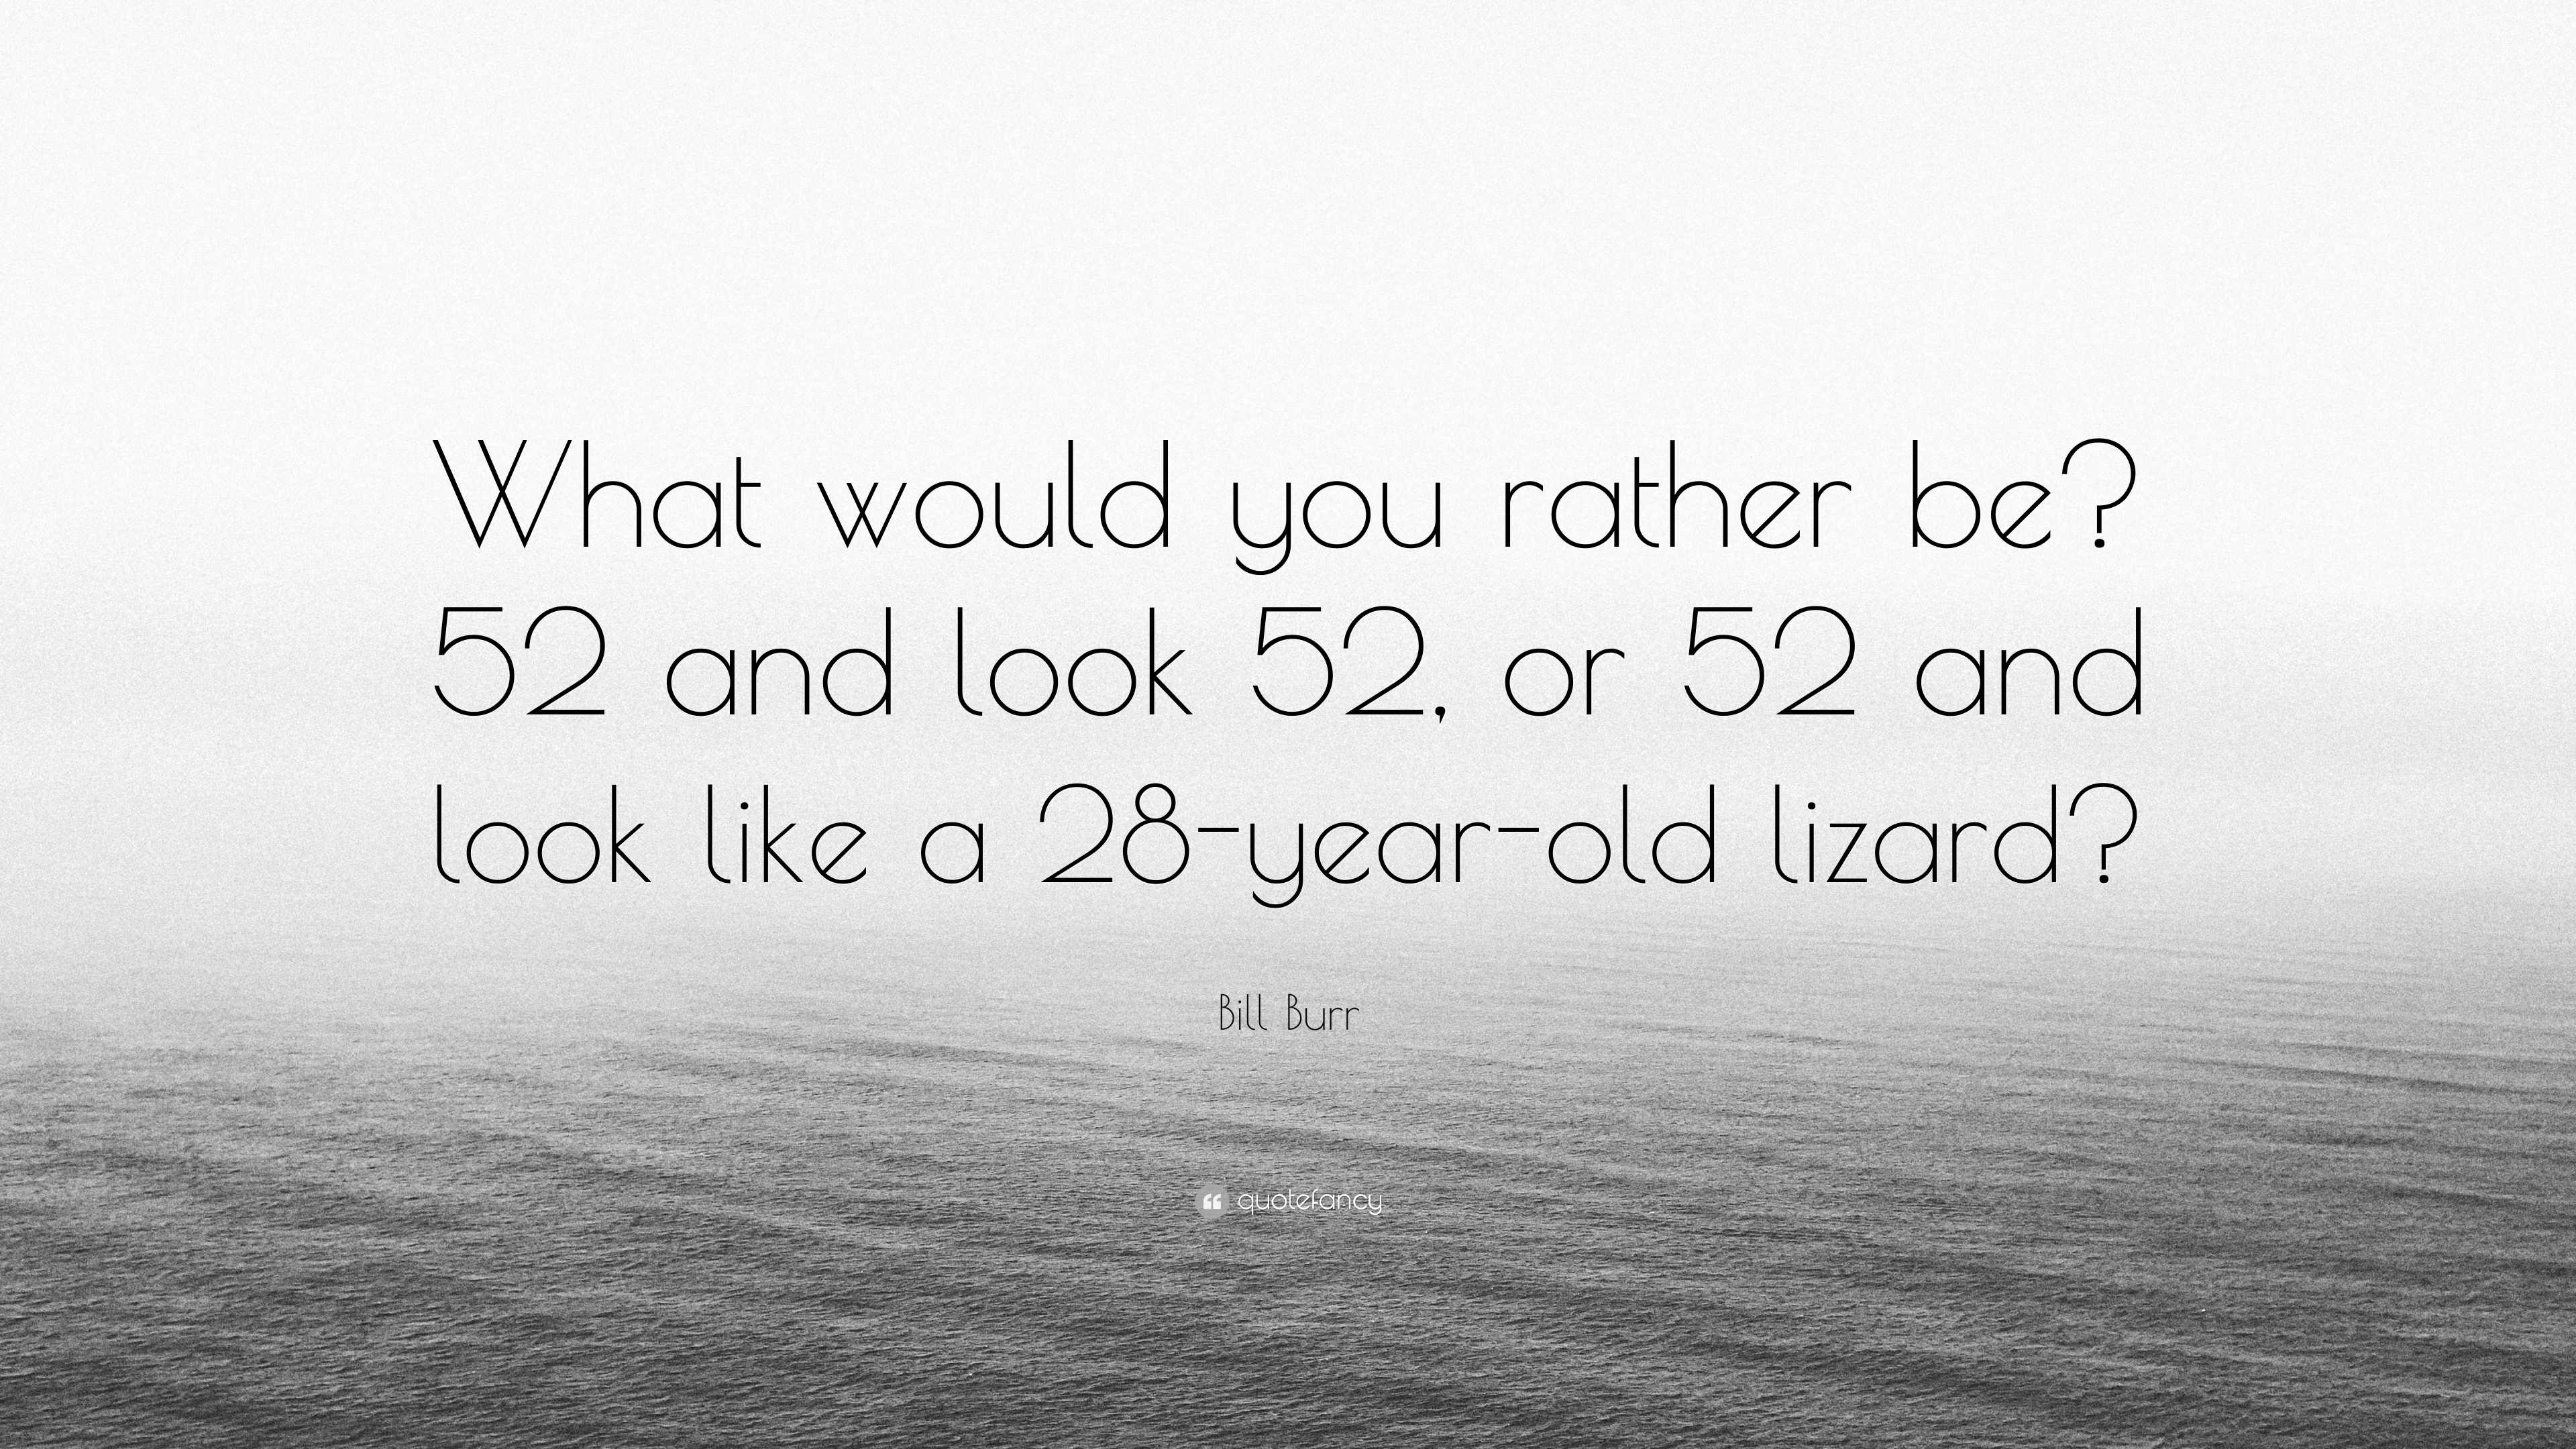 https://quotefancy.com/media/wallpaper/3840x2160/7919552-Bill-Burr-Quote-What-would-you-rather-be-52-and-look-52-or-52-and.jpg